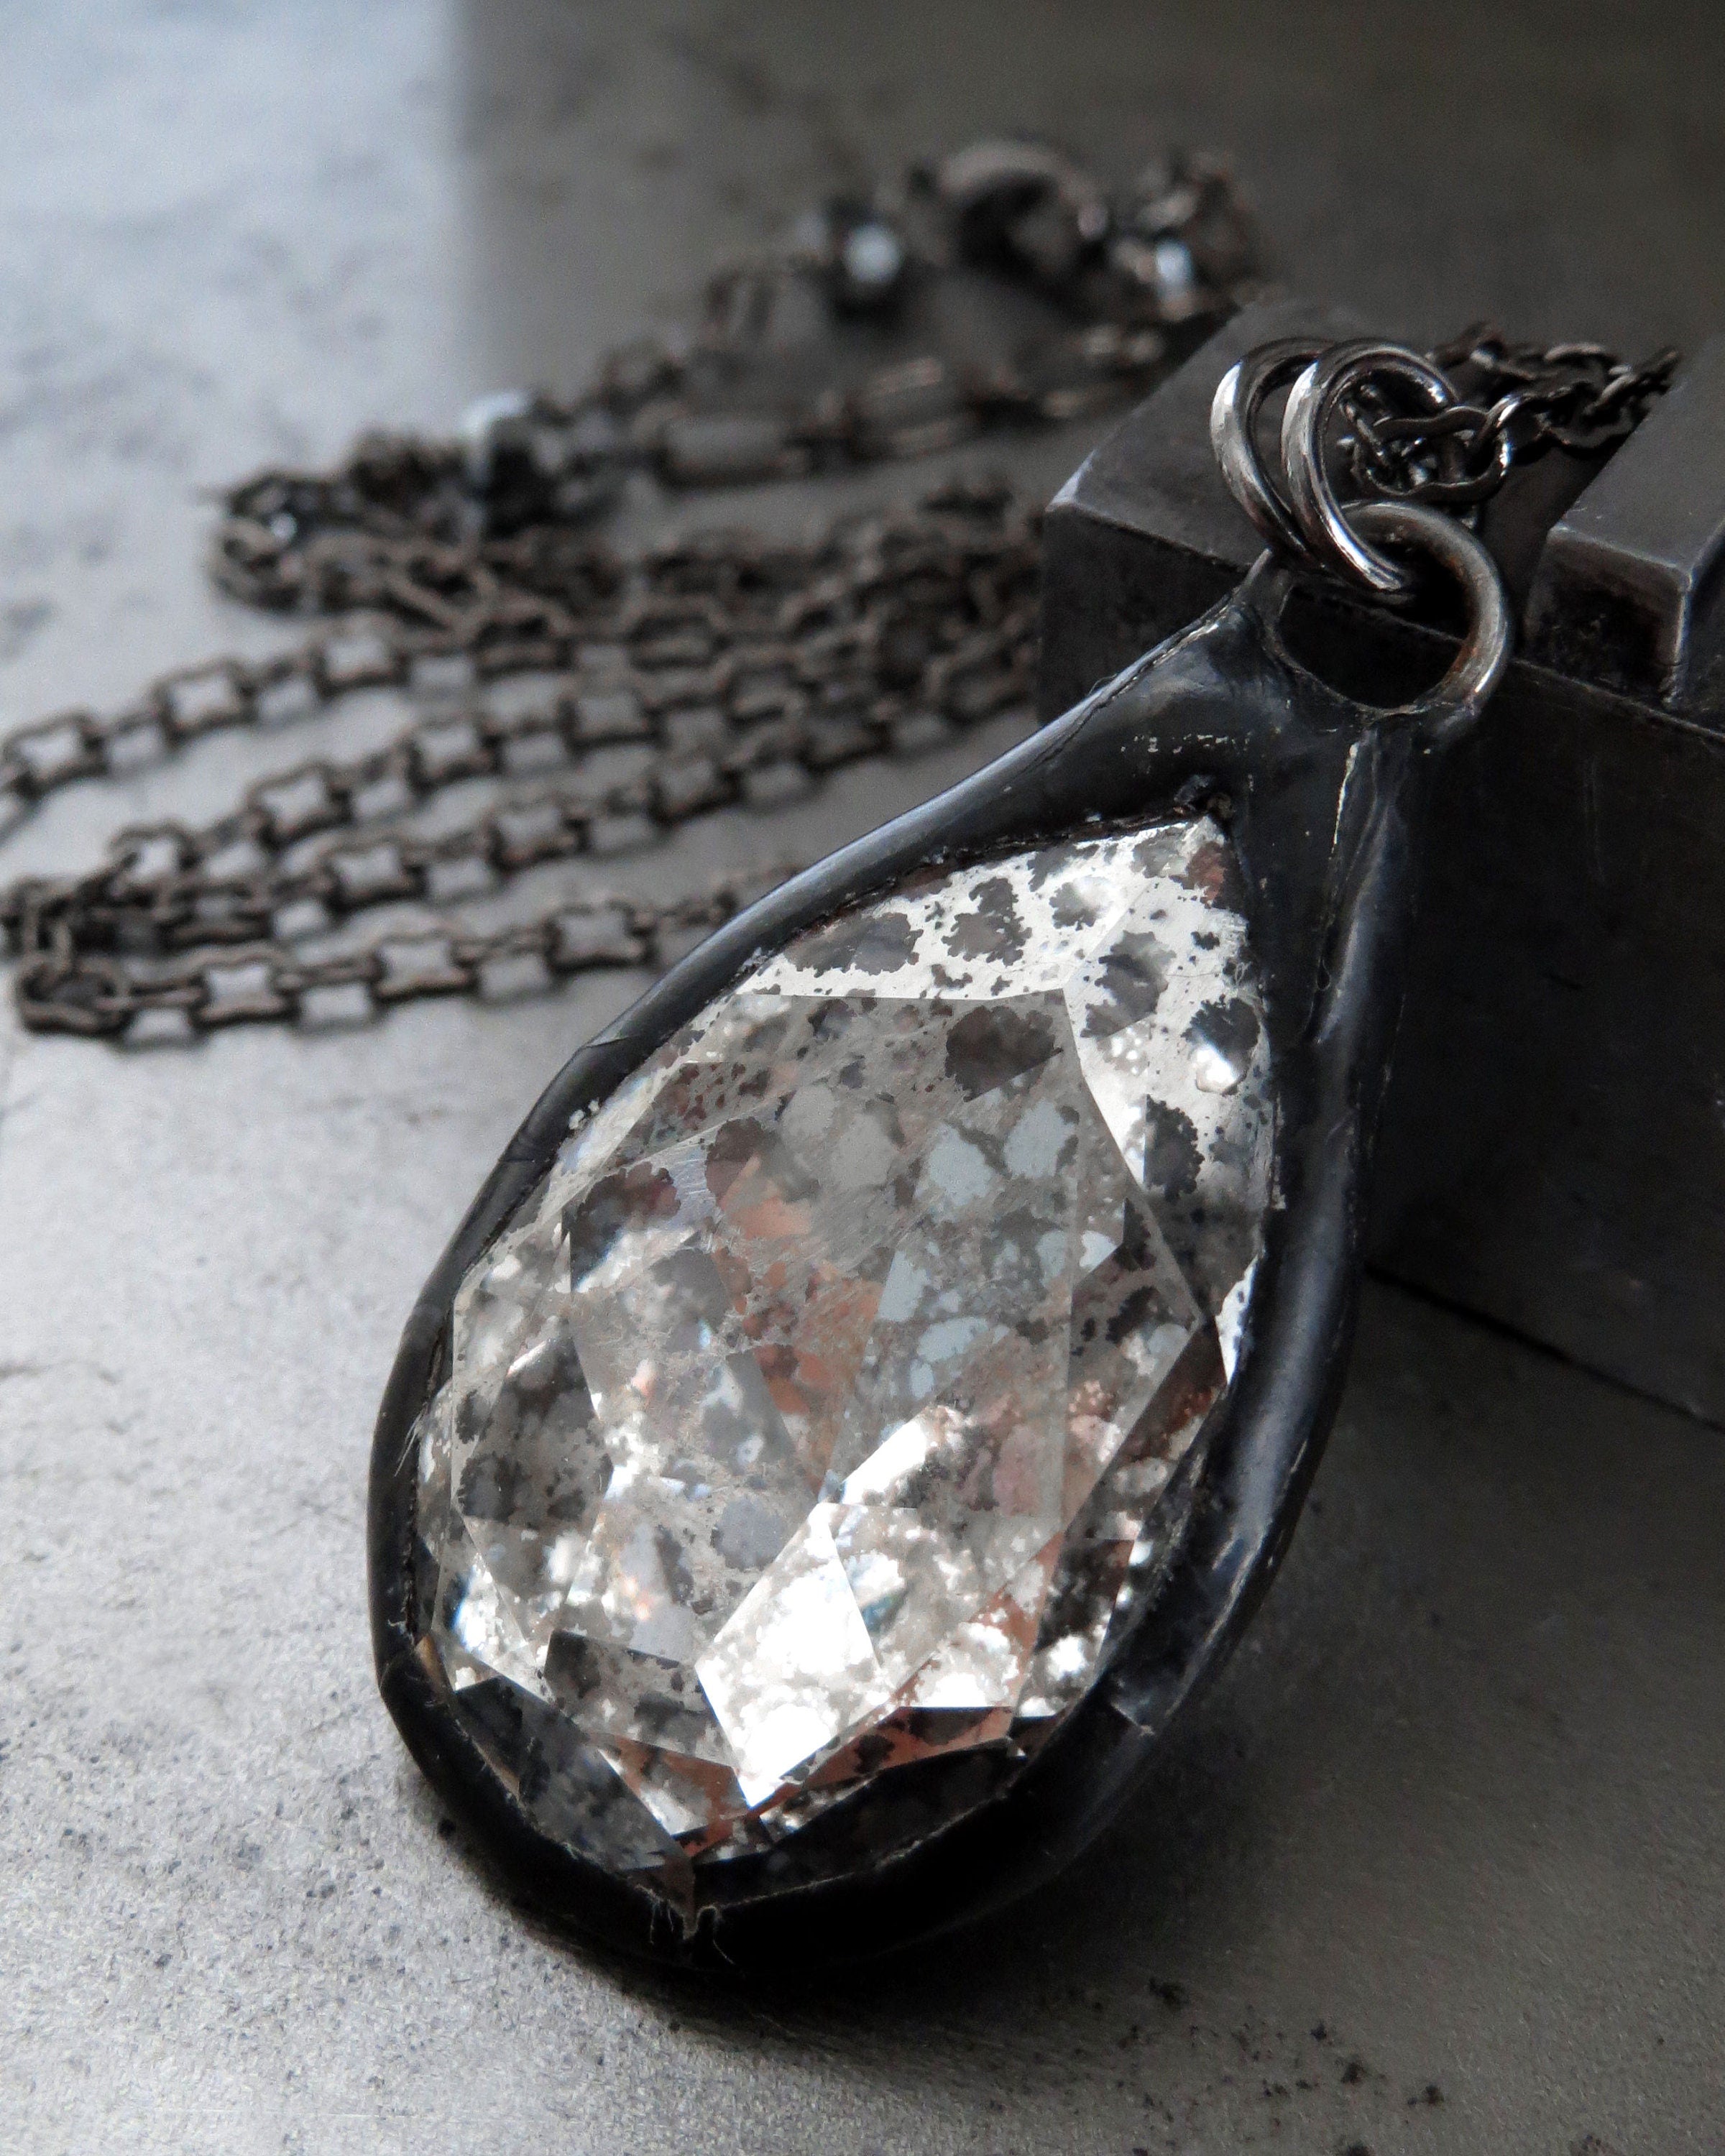 MERCURY - Silver Patina Crystal Teardrop Pendant Necklace, Black Gunmetal Chain, Gothic Silver Crystal Necklace, Gothic Halloween Jewerly